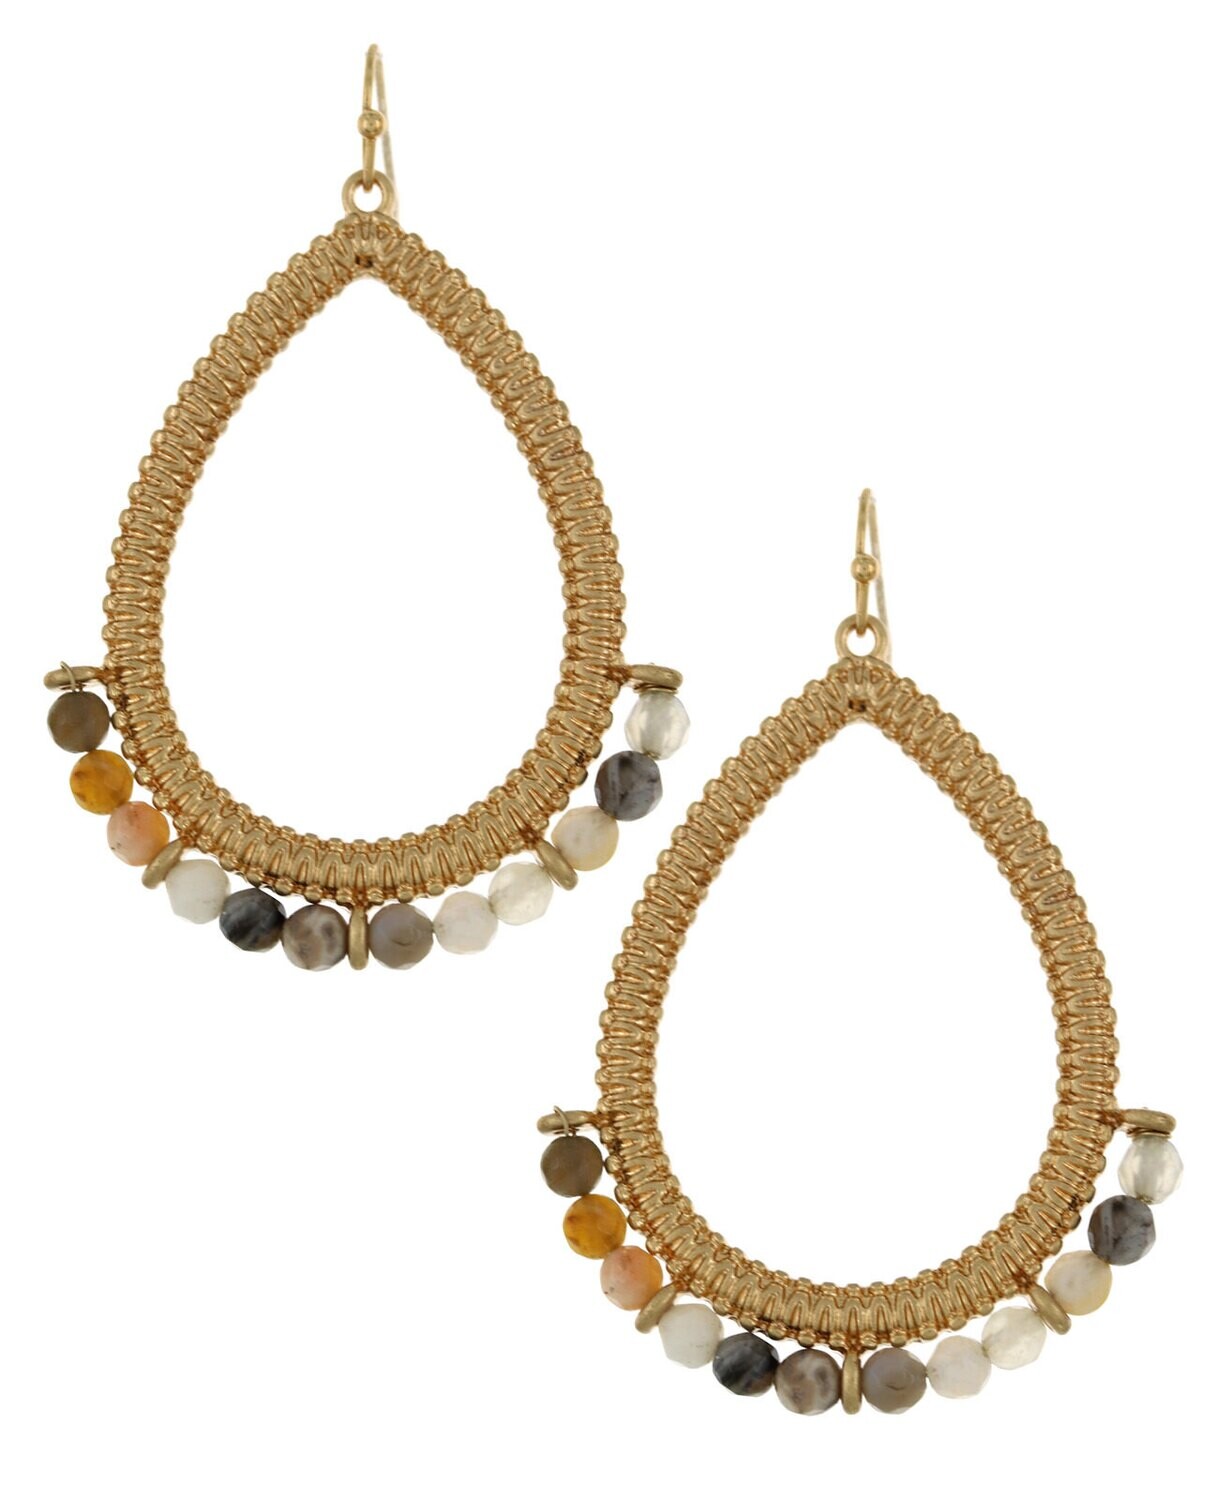 Ornate Gold Oval Hoop with Earth Tone Beading Earrings